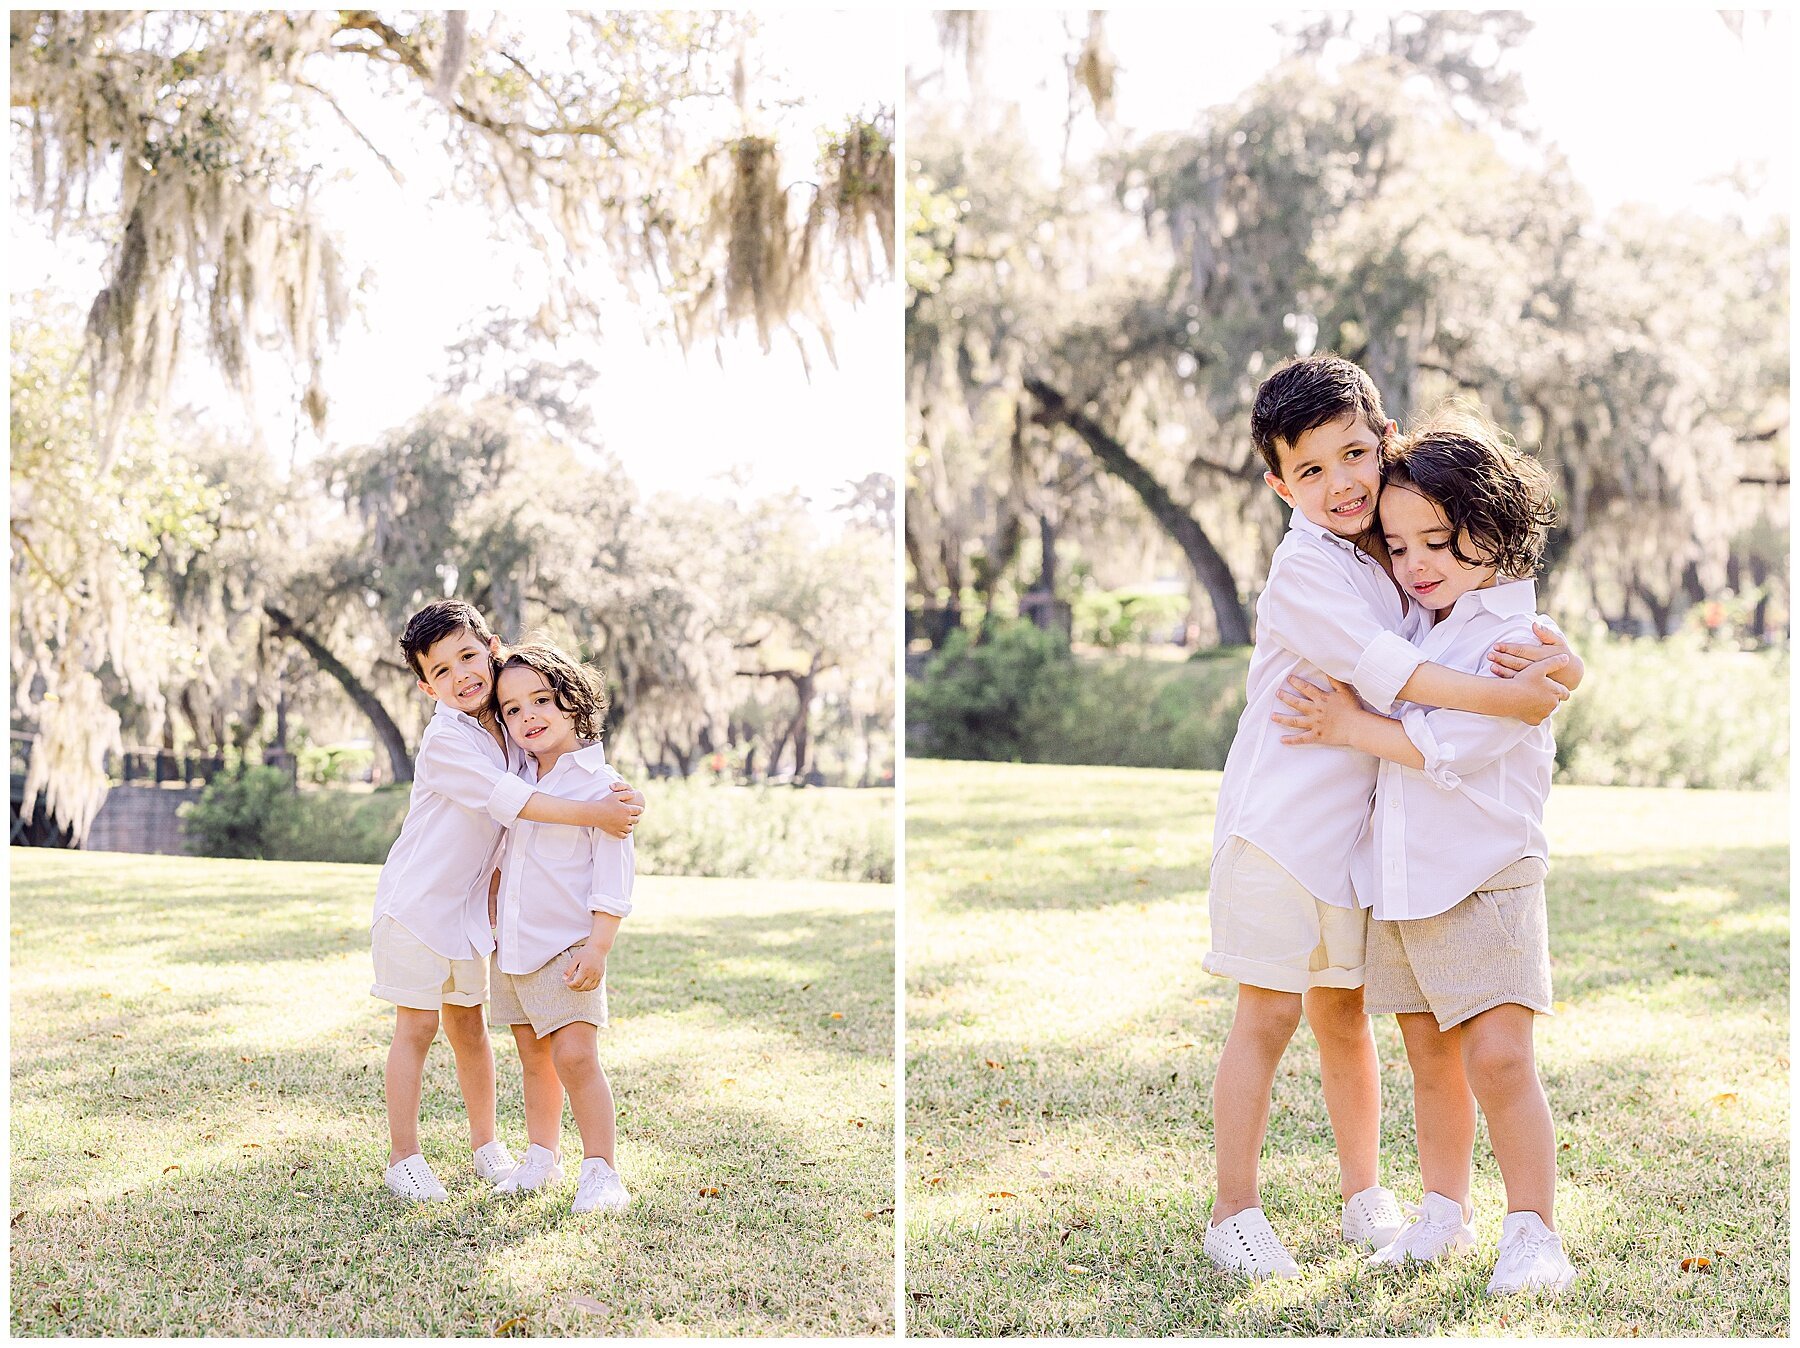 Katherine_Ives_Photography_Sallah_Palmetto_Bluff_Family_Session_2.JPG